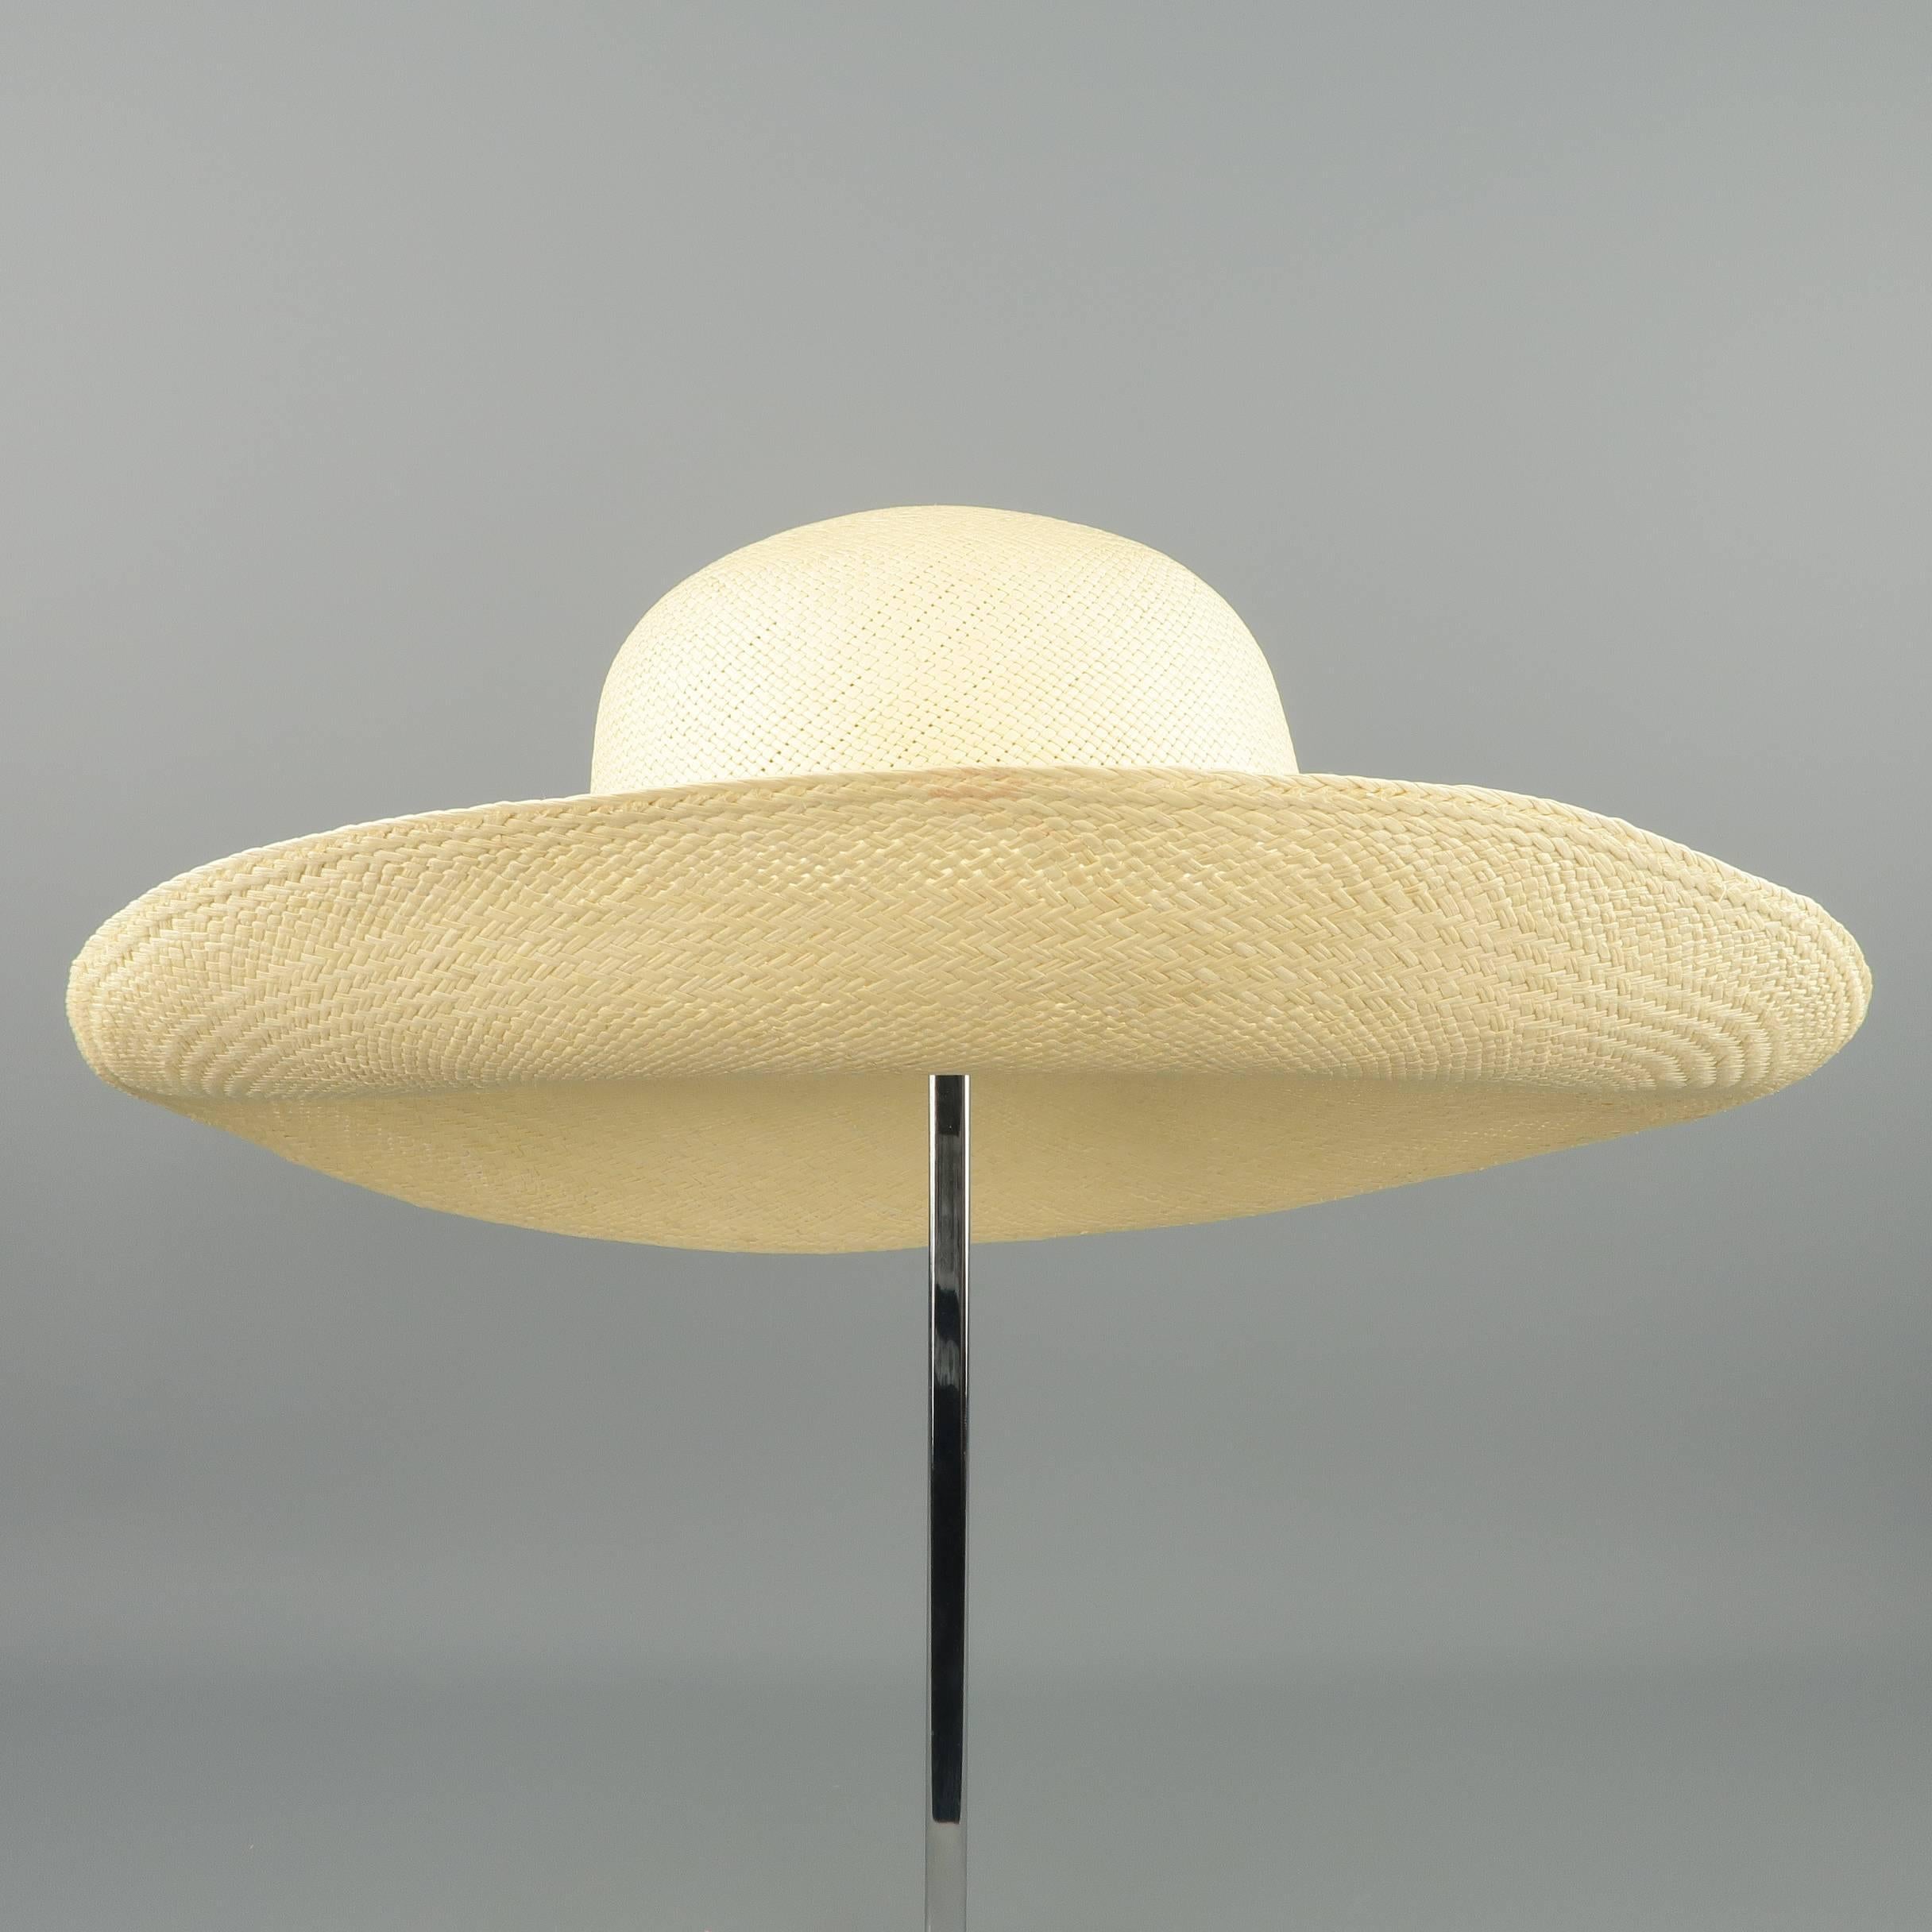 Vintage sun hat in light beige woven straw with a semi wide brim.
Good Pre-Owned Condition.
 
Measurements:
    Opening: 7 x 7.5 in.
    Brim: 4 in.
    Height: 4 in.